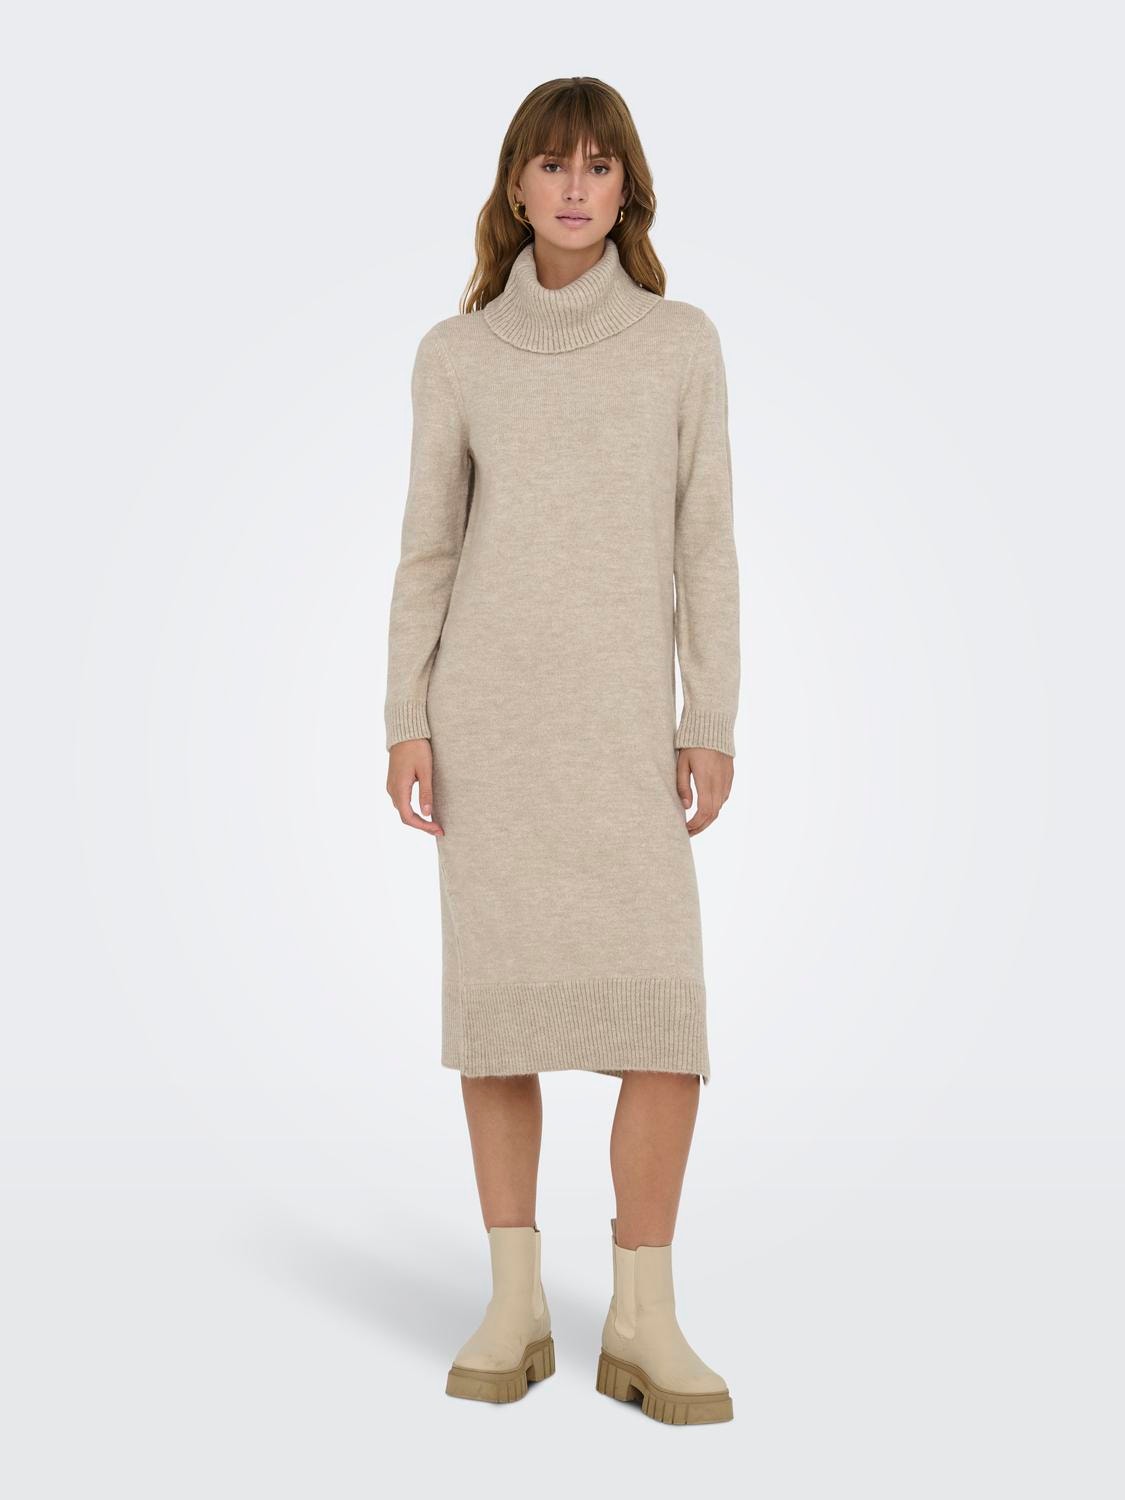 Dress | Knitted ONLY® Light Grey Roll neck |